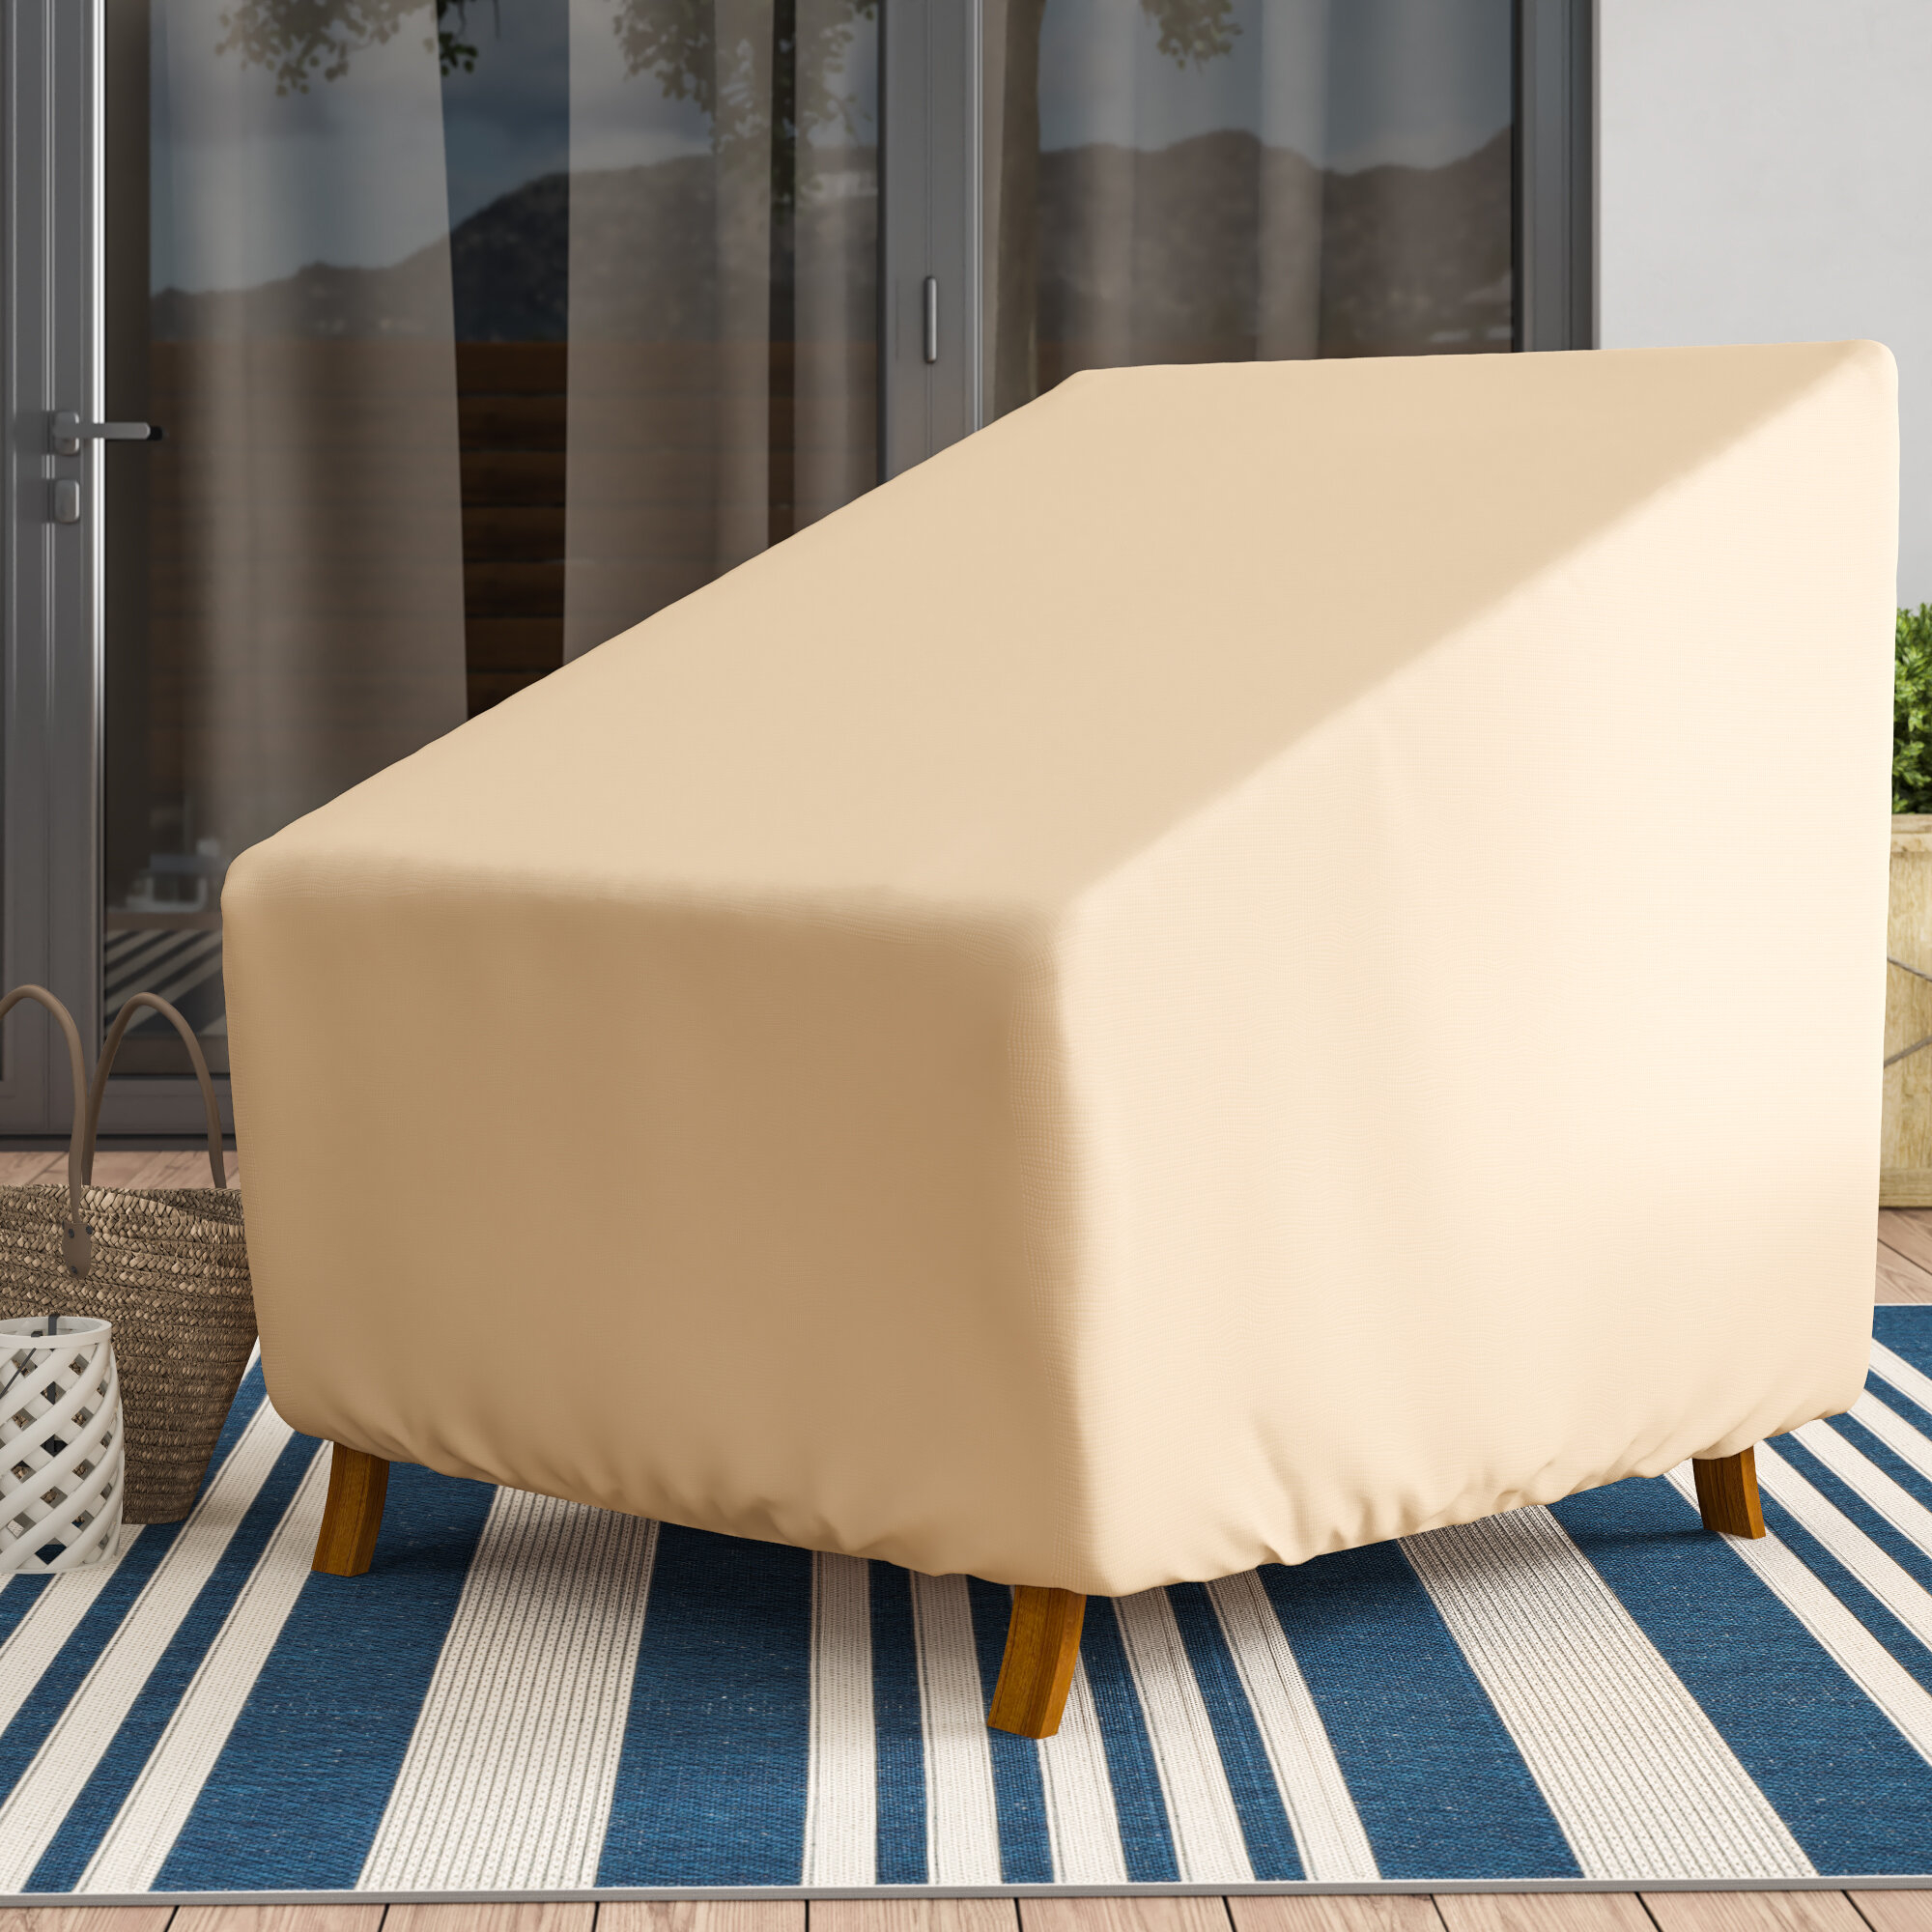 Breathable Outdoor Furniture Covers Elegant Patio Chair In throughout sizing 2000 X 2000